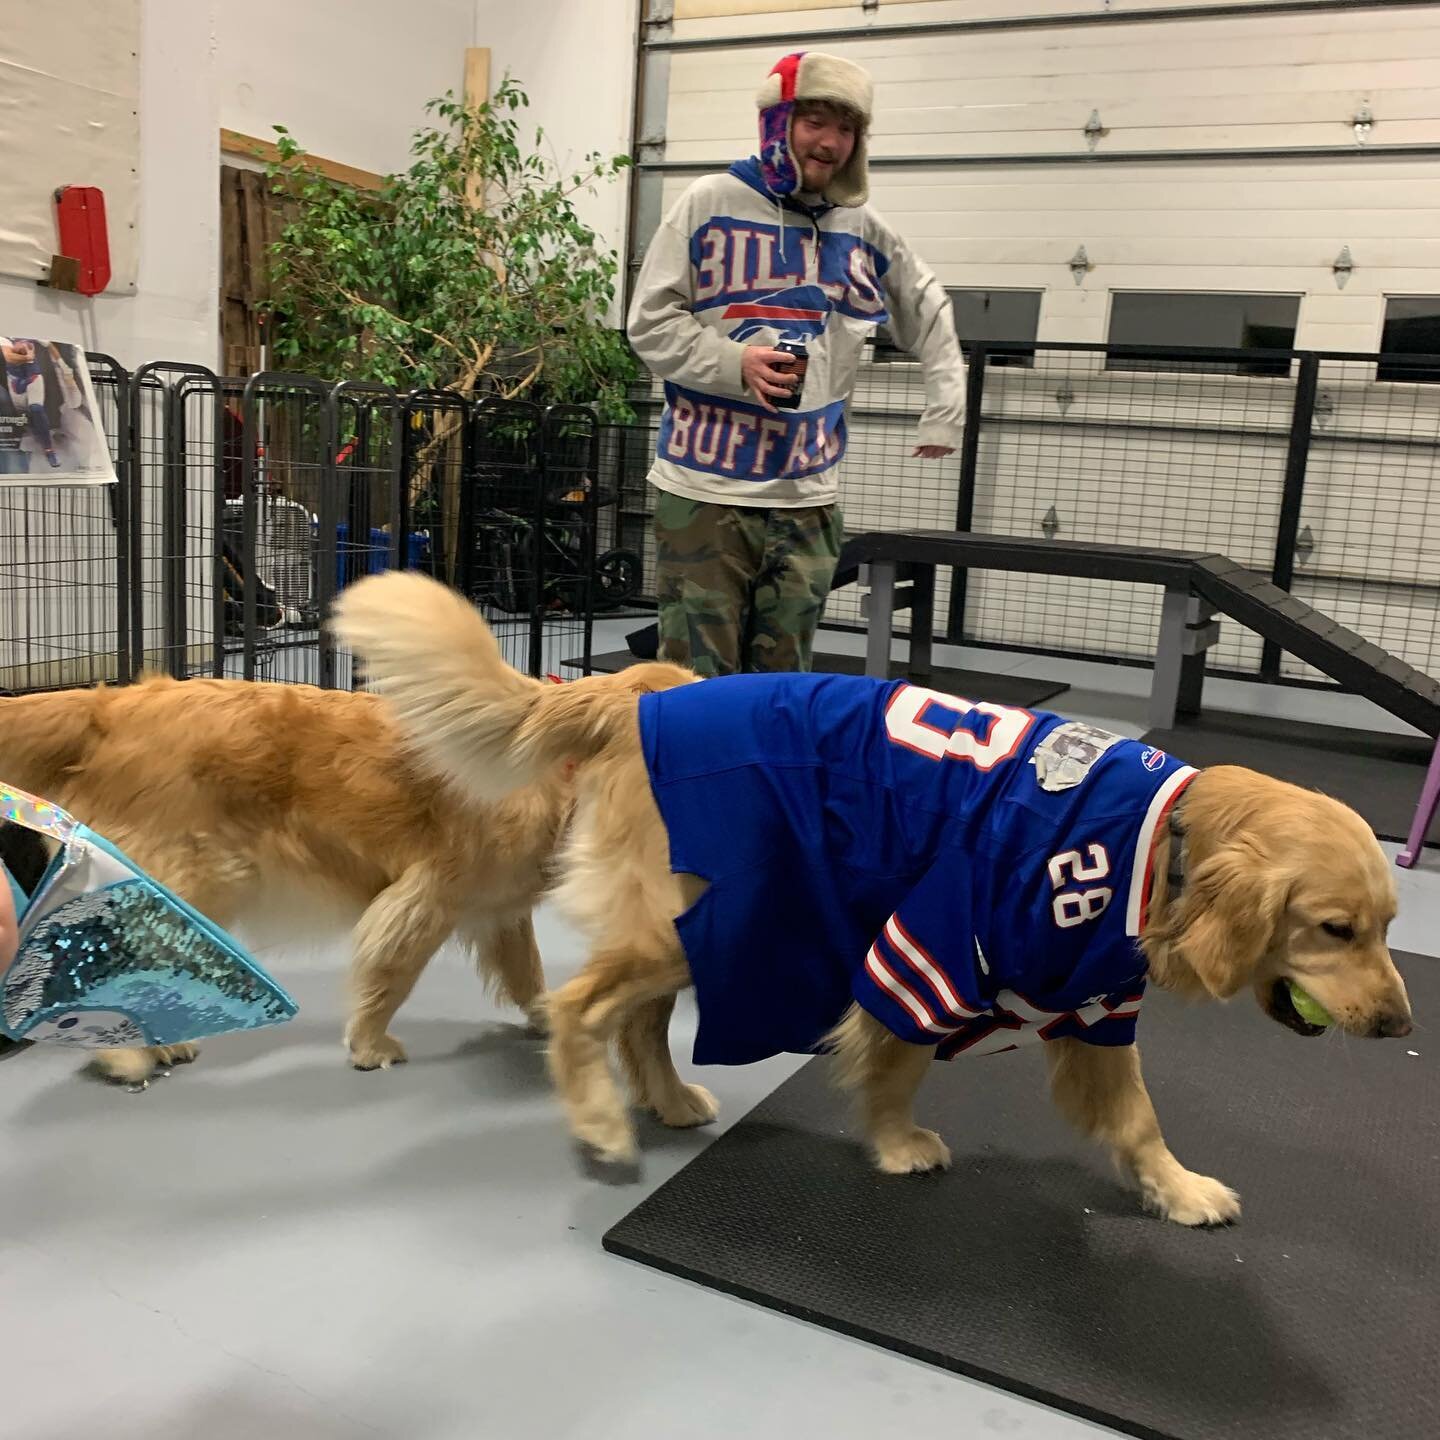 Looks like after hours was all about the Bills tonight!  #peacelovepetcare #gobills❤️🏈💙 #family #steamboatdogs